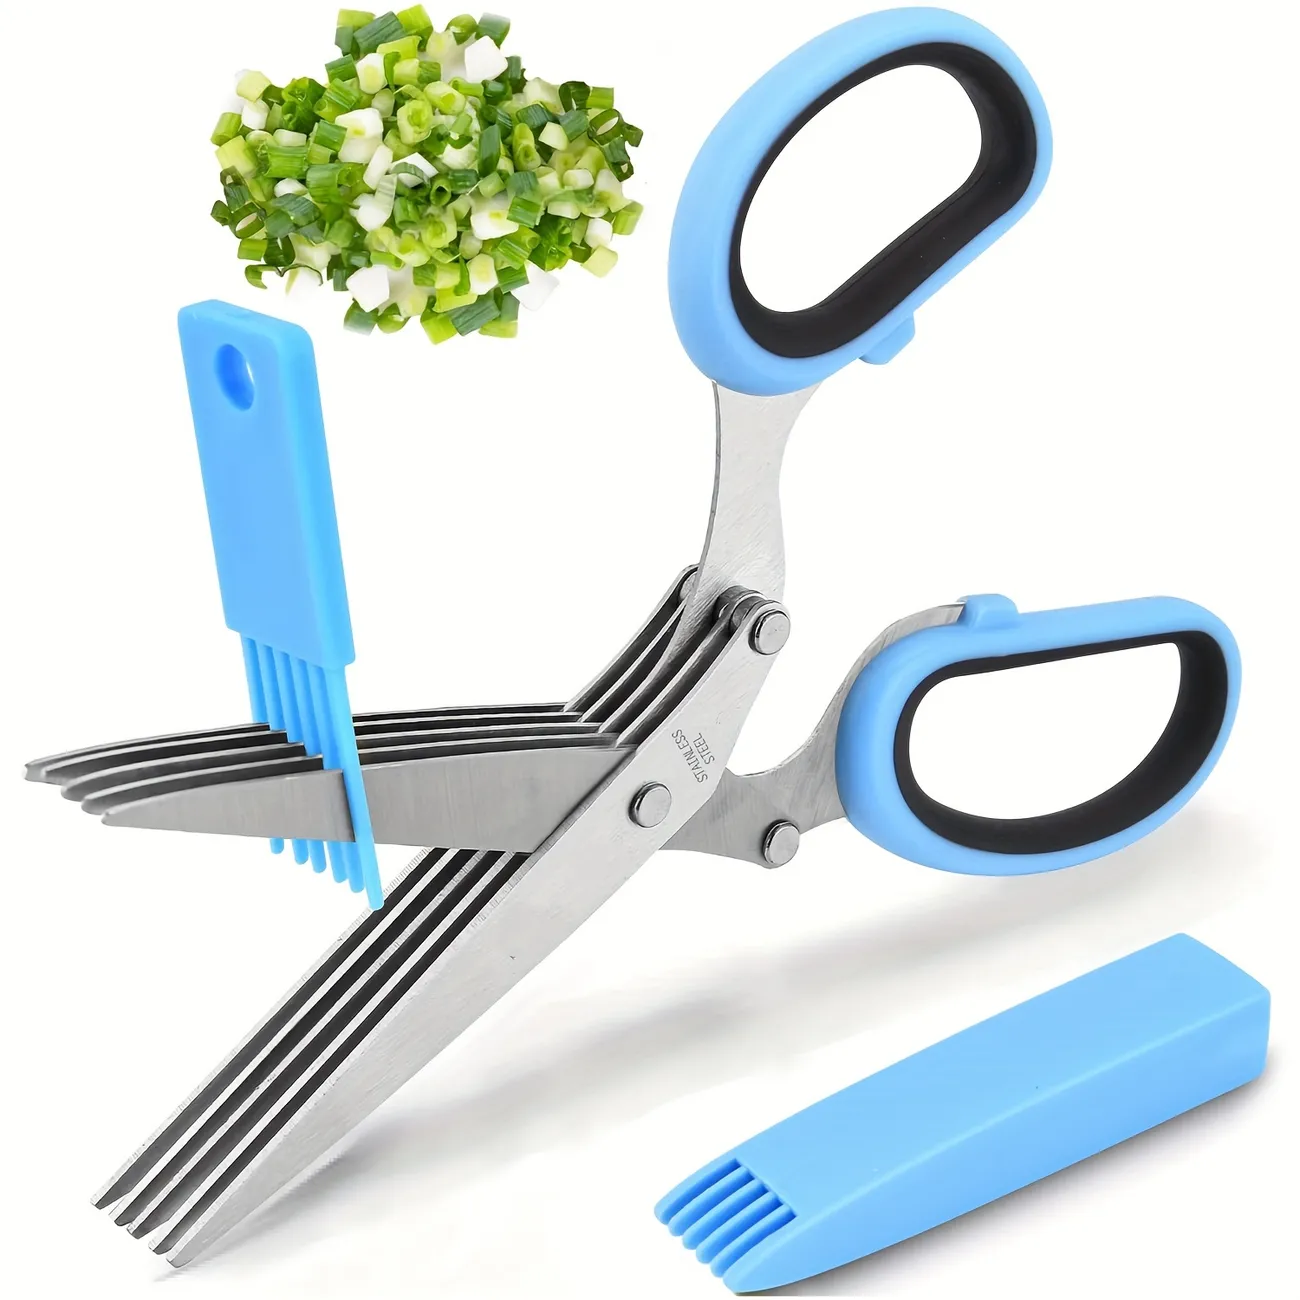 Kitchen Scissors Set - 5 Layer Scissors With Cover, Cool Kitchen